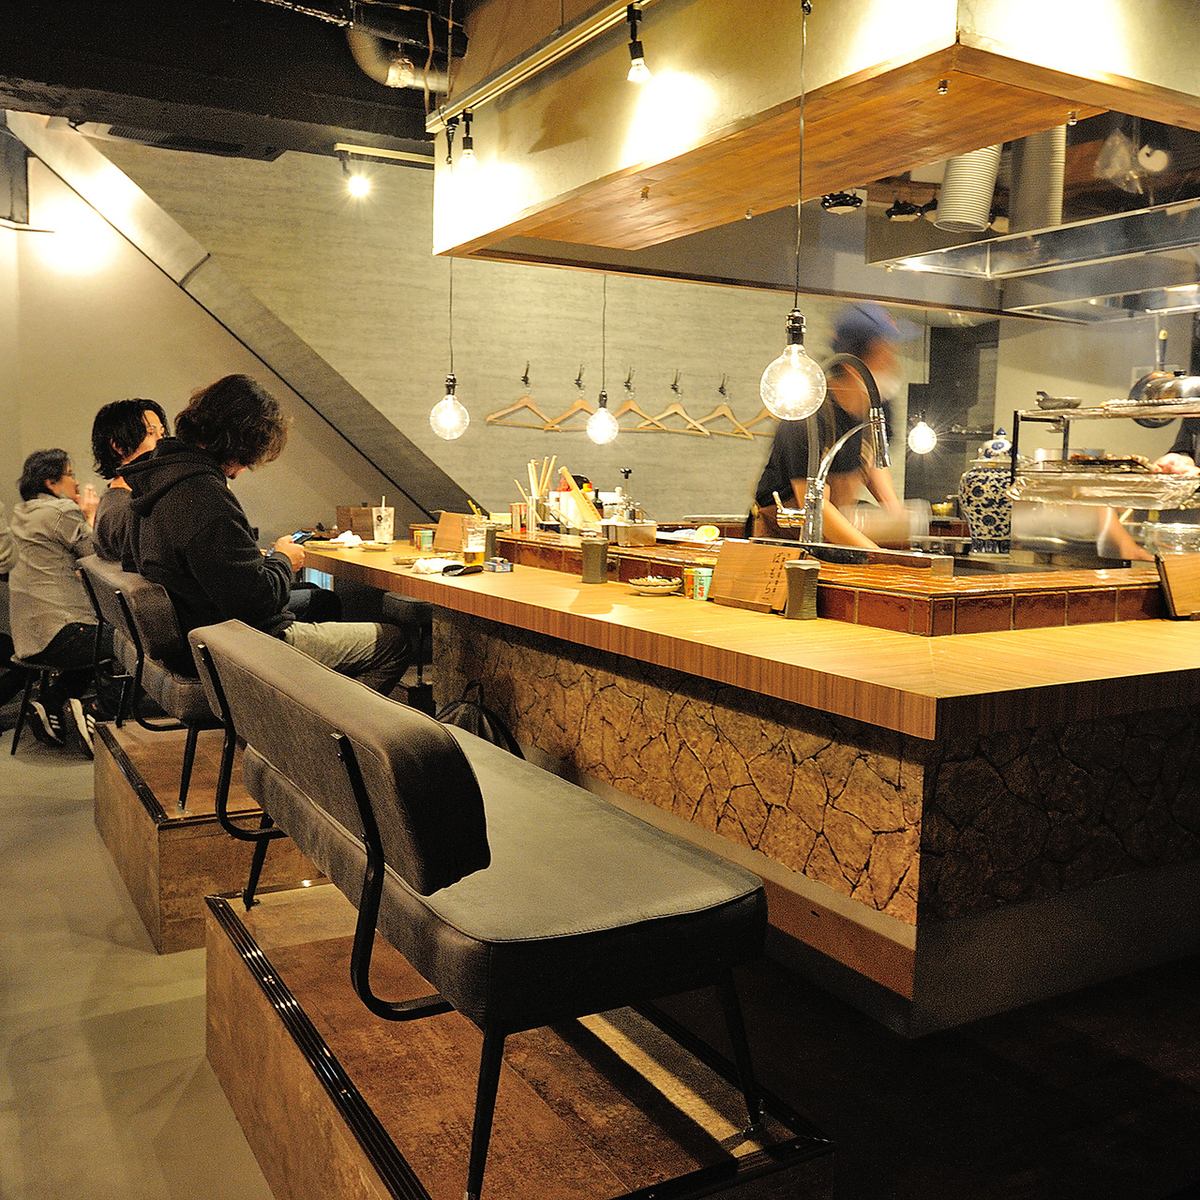 Counter with sofa seats ♪ The perfect interior for a yakitori date ♪